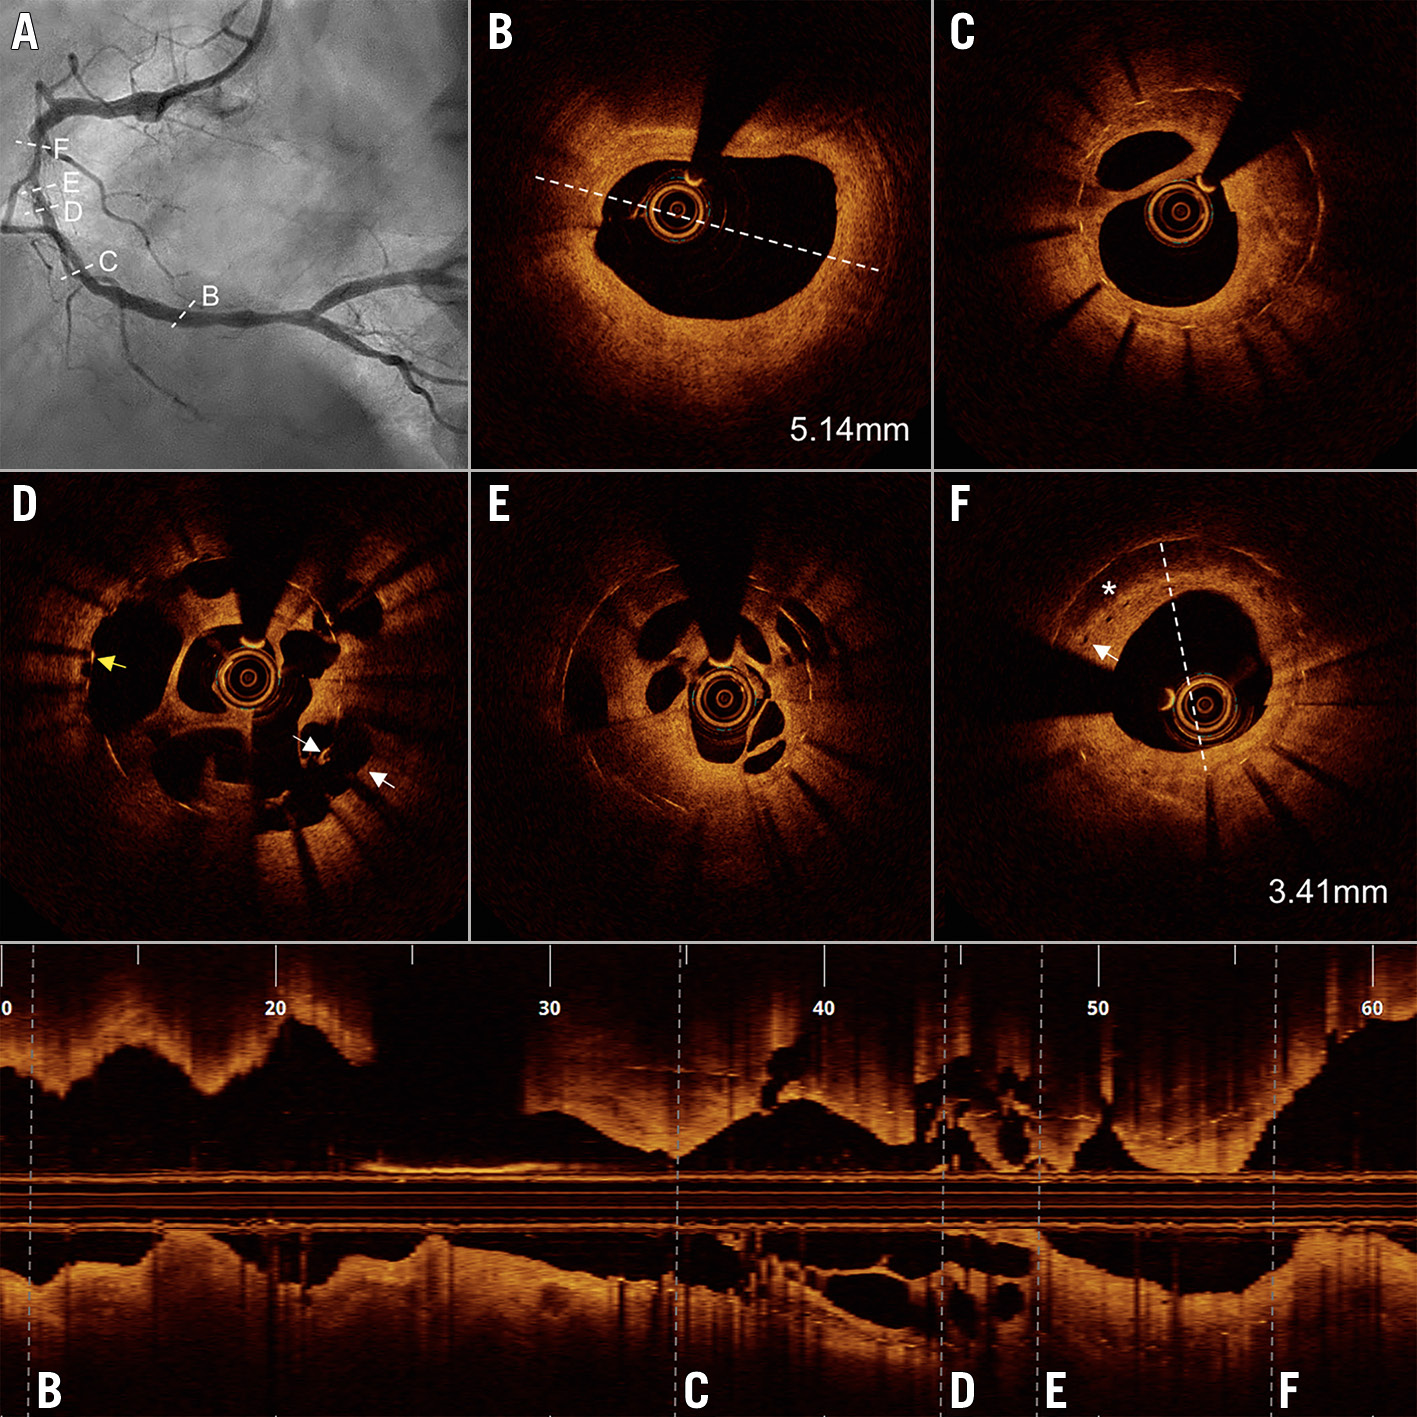 Figure 1. Angiography and optical coherence tomography findings. A) Angiography showed in-stent restenosis in the right coronary artery. B) External elastic membrane diameter at the distal reference was 5.14 mm. C) - E) Recanalised thrombus with multiple channels within the stent. D) Recanalised thrombus with malapposition (white arrows) and uncovered struts (yellow arrow). F) Neoatherosclerosis with lipid pool (asterisk) and microvessels (white arrow) in the setting of an undersized stent.